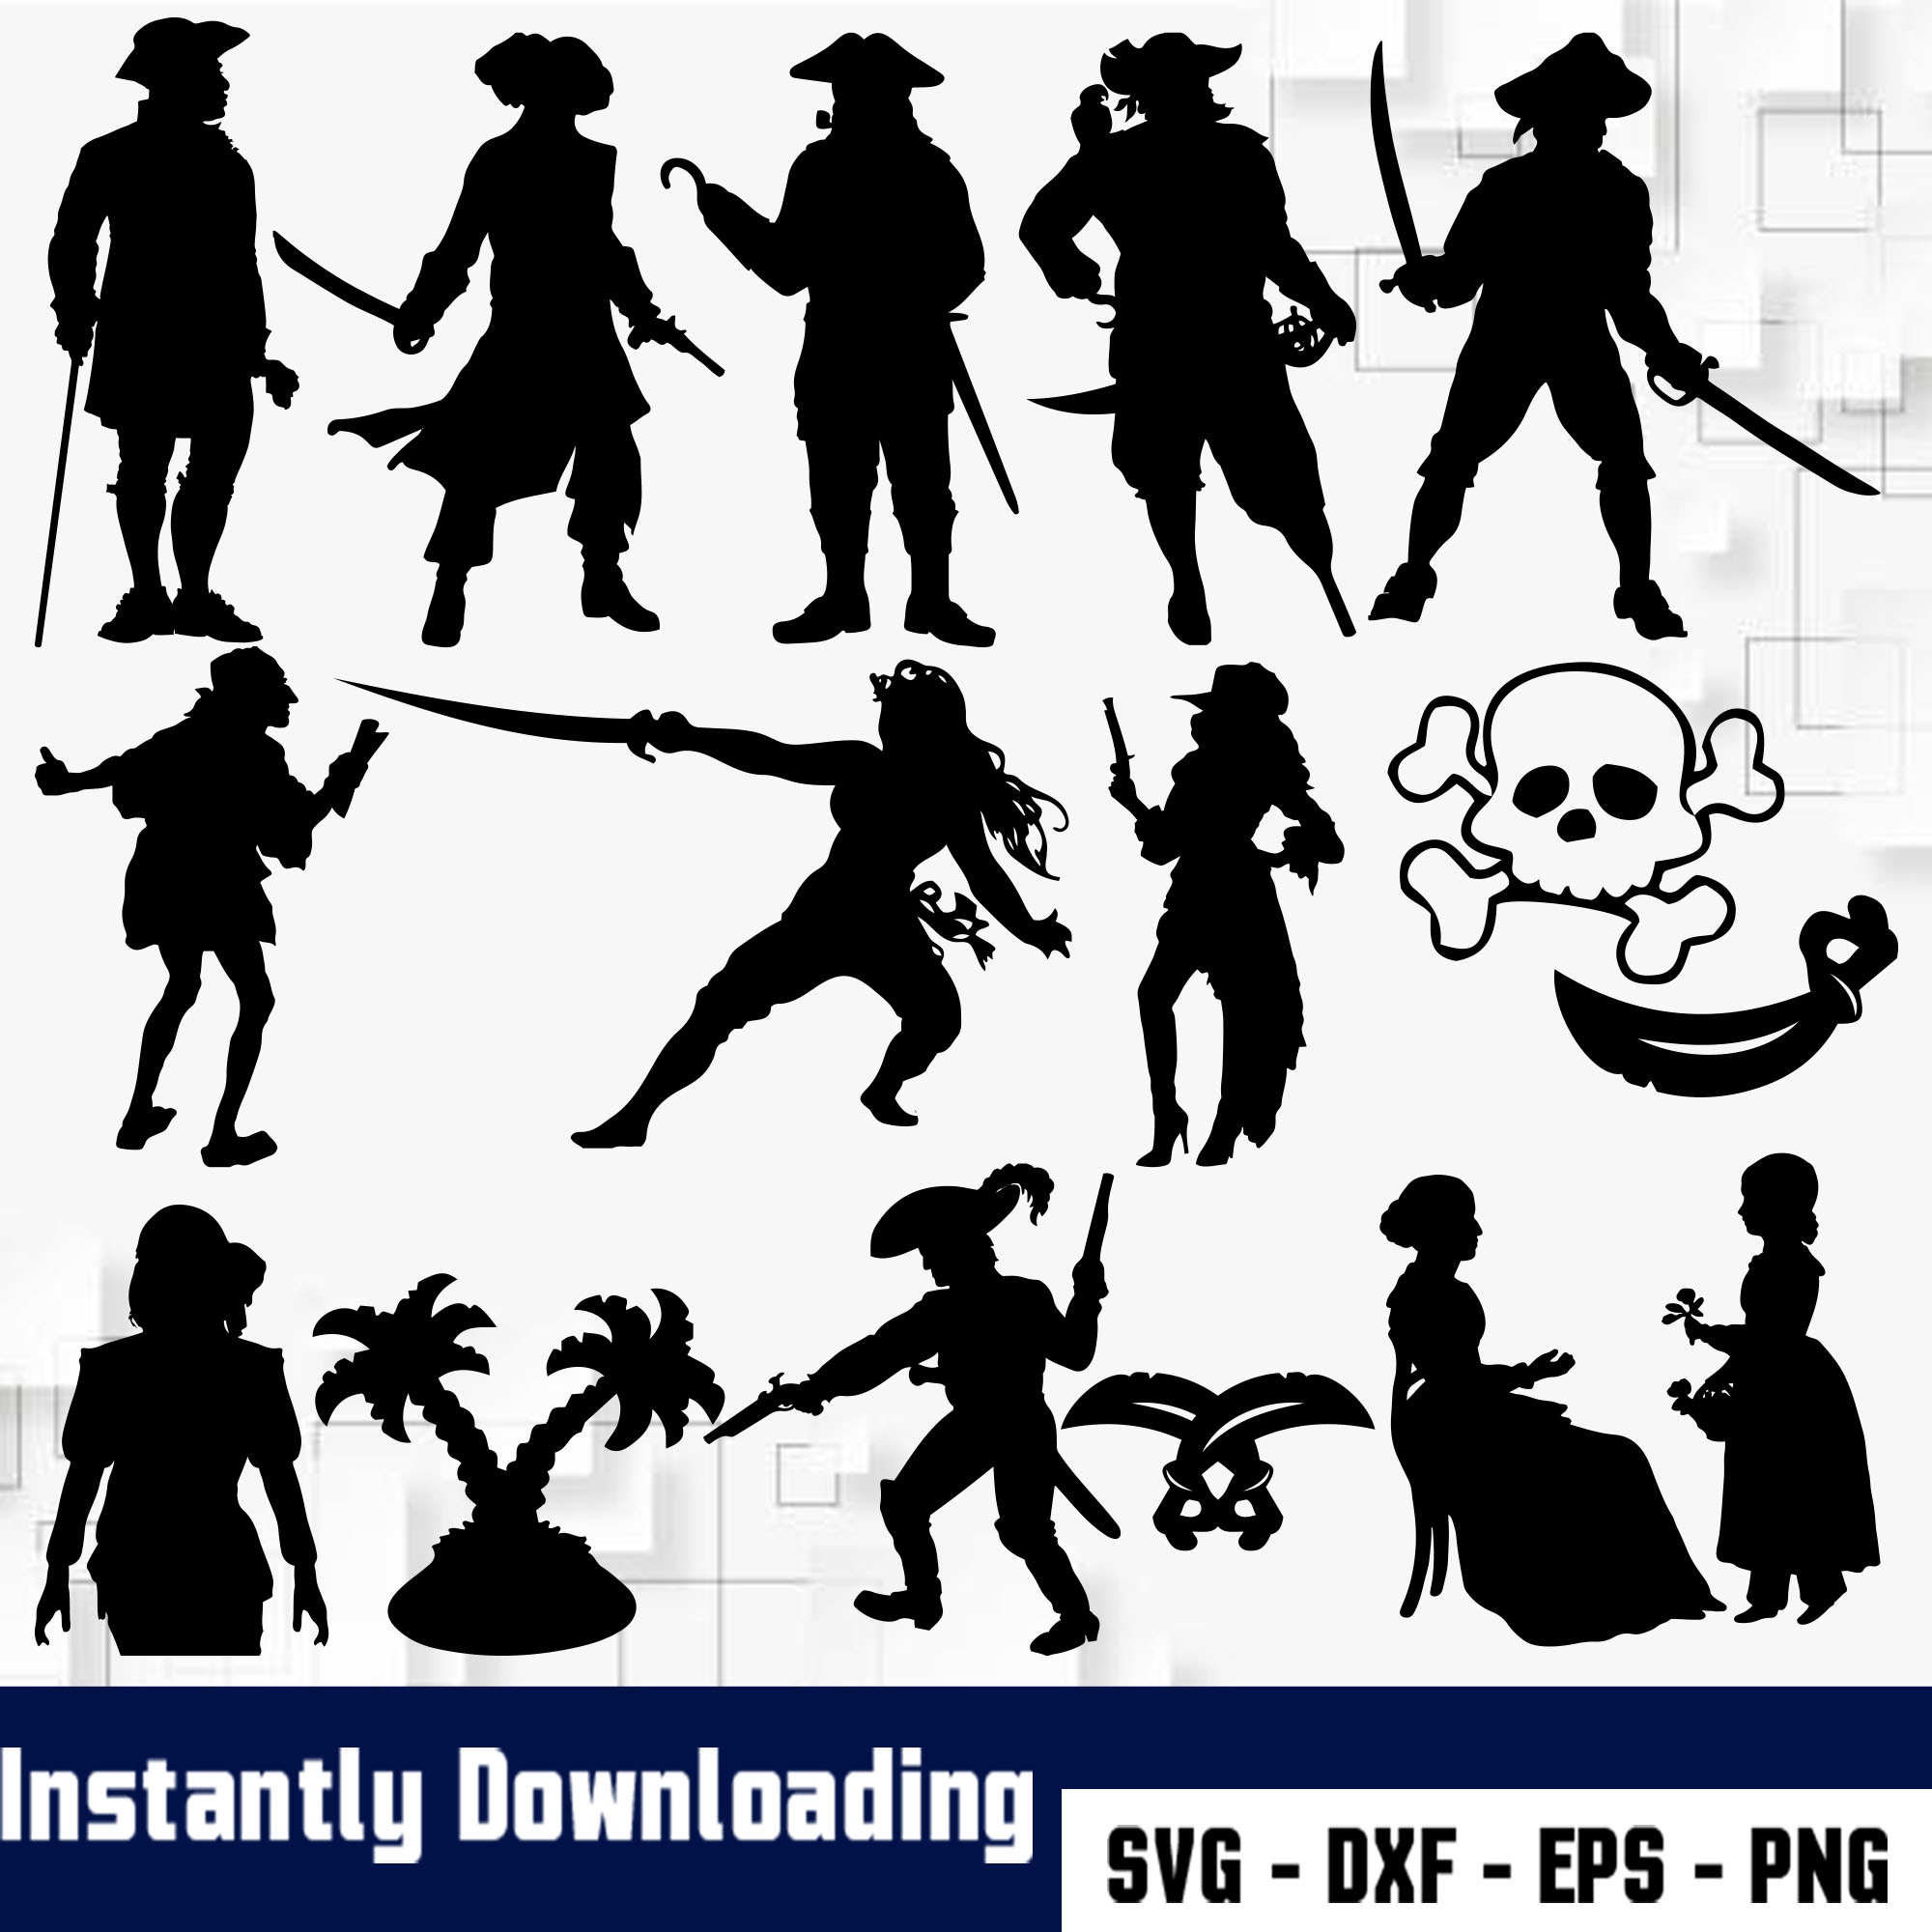 Download Pirate SVG Cut Files - vector svg format